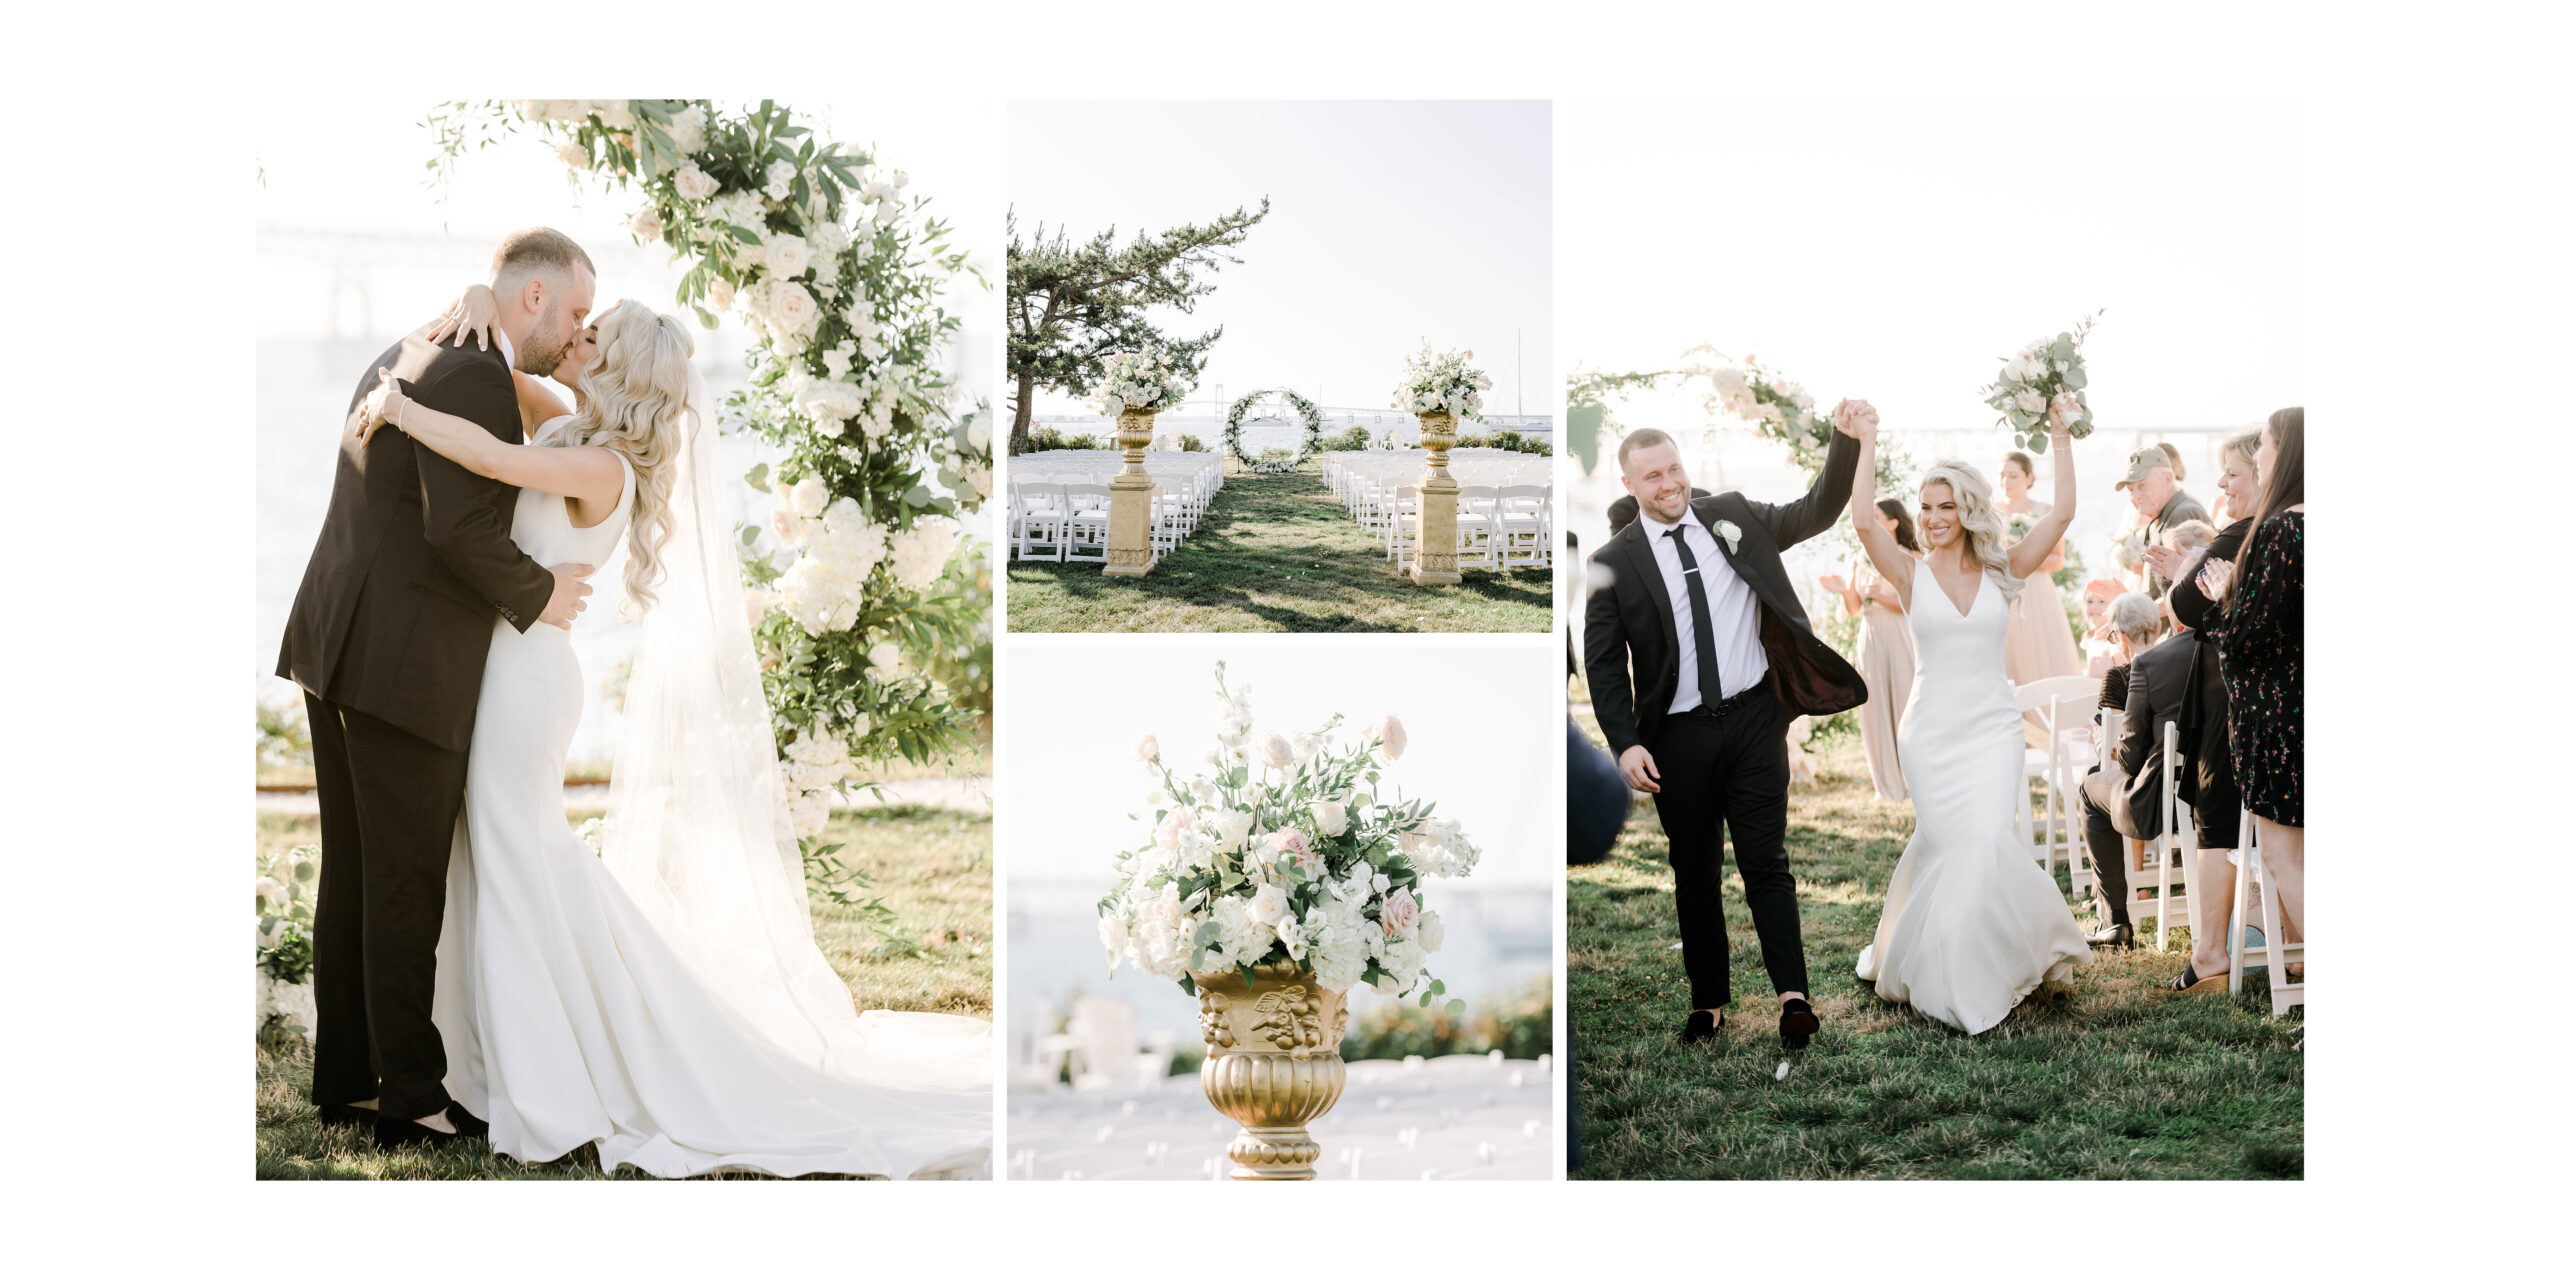 All Things Wedding Photography: an Interview with Host Sara Zarrella and Co-host & Producer Dan Phillips on Wedding Secrets Unveiled! Podcast